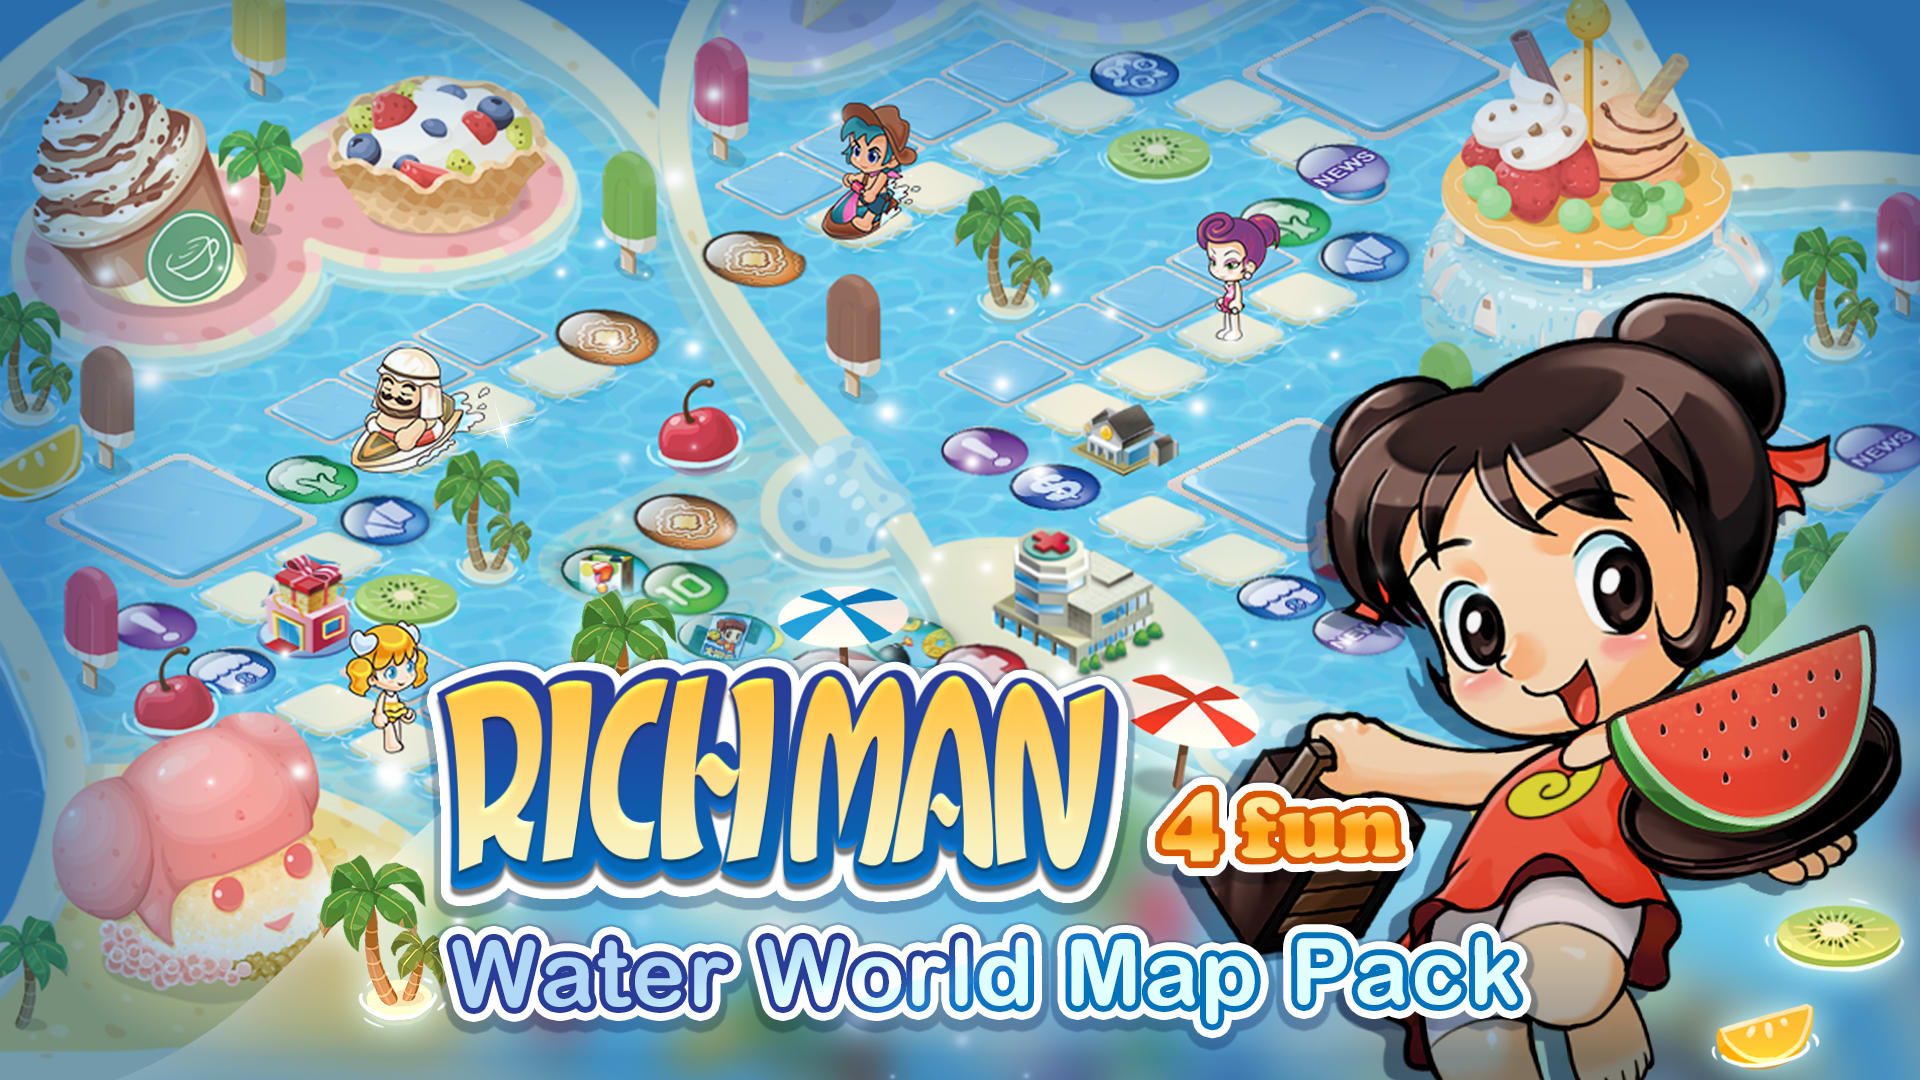 Water World Map Pack